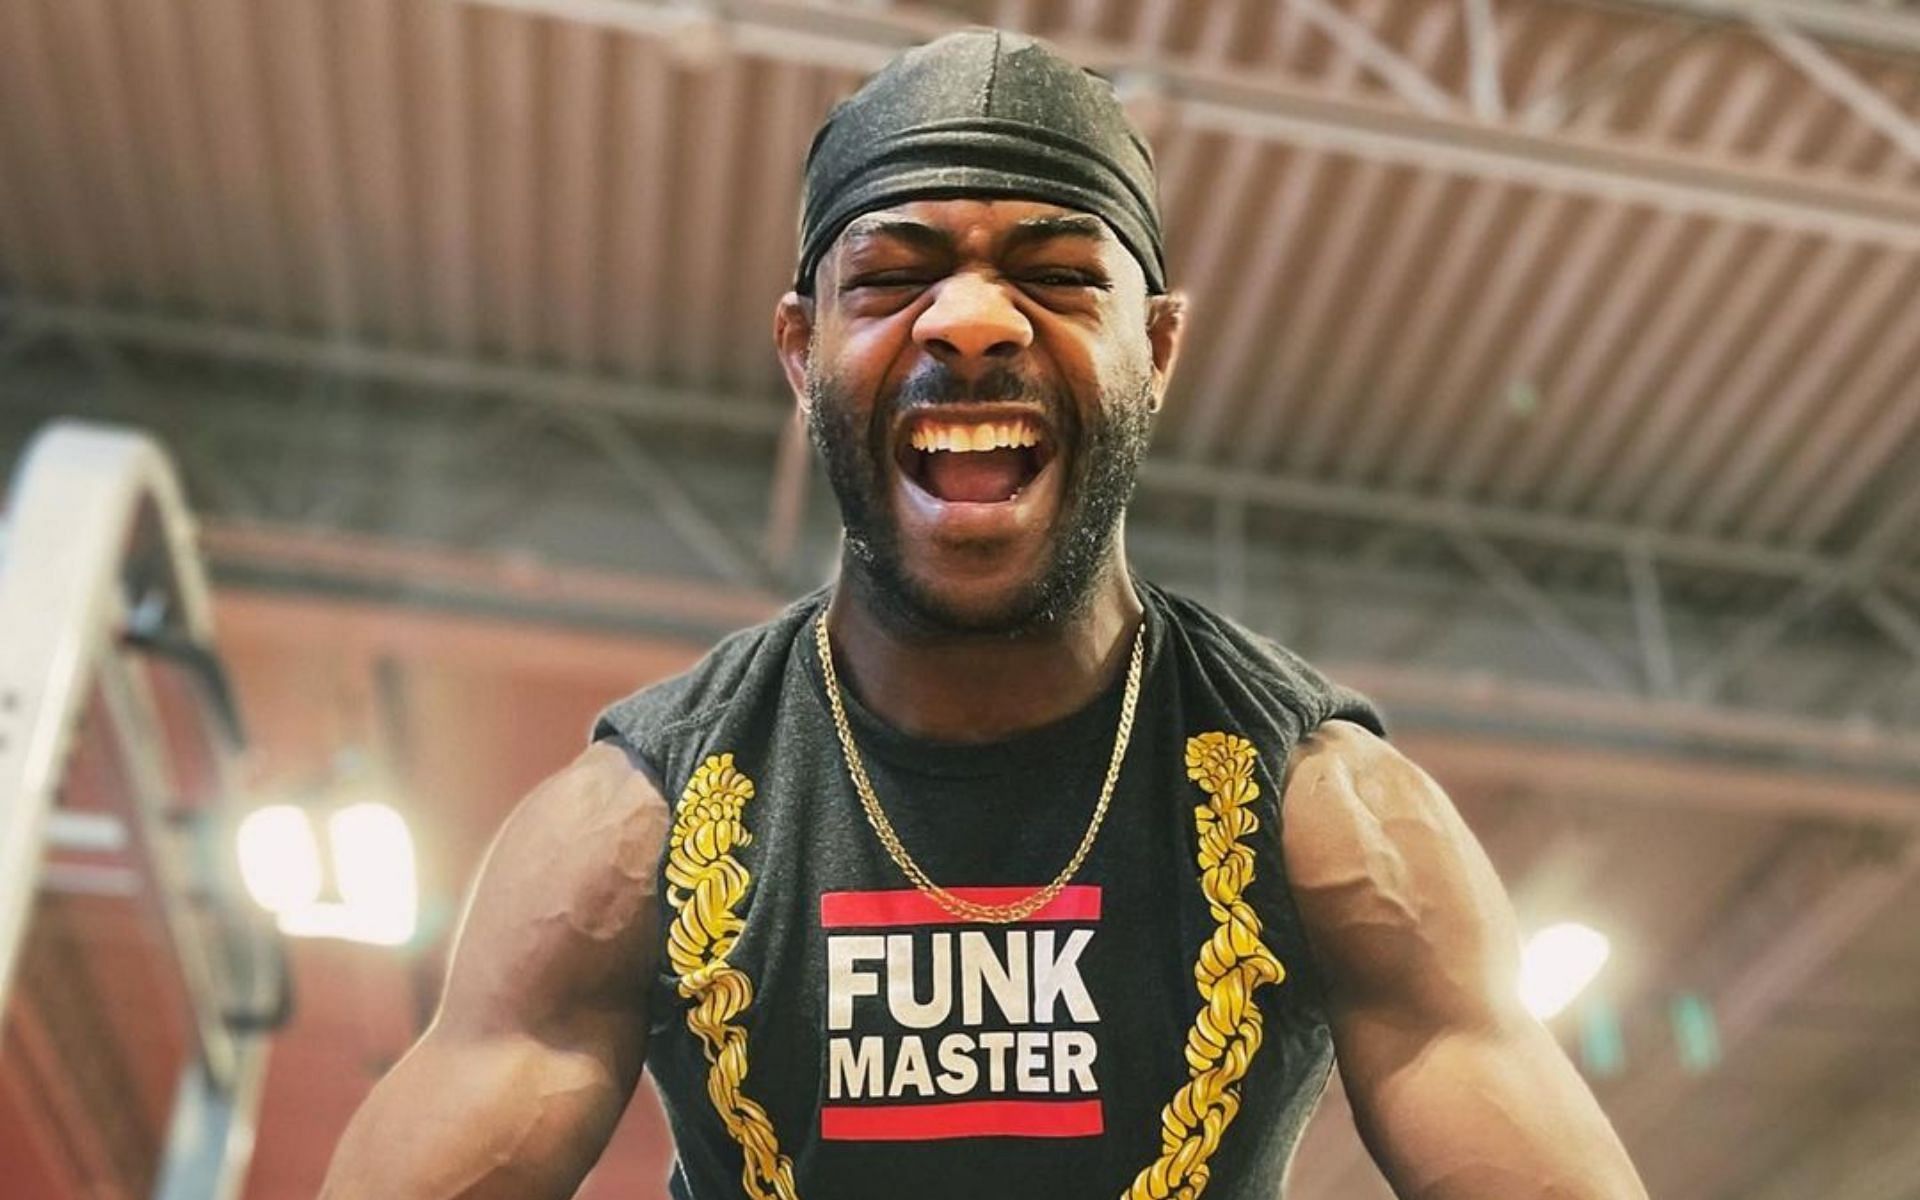 Aljamain Sterling flexing his physique [Image Courtesy: @funkmastermma on Instagram]